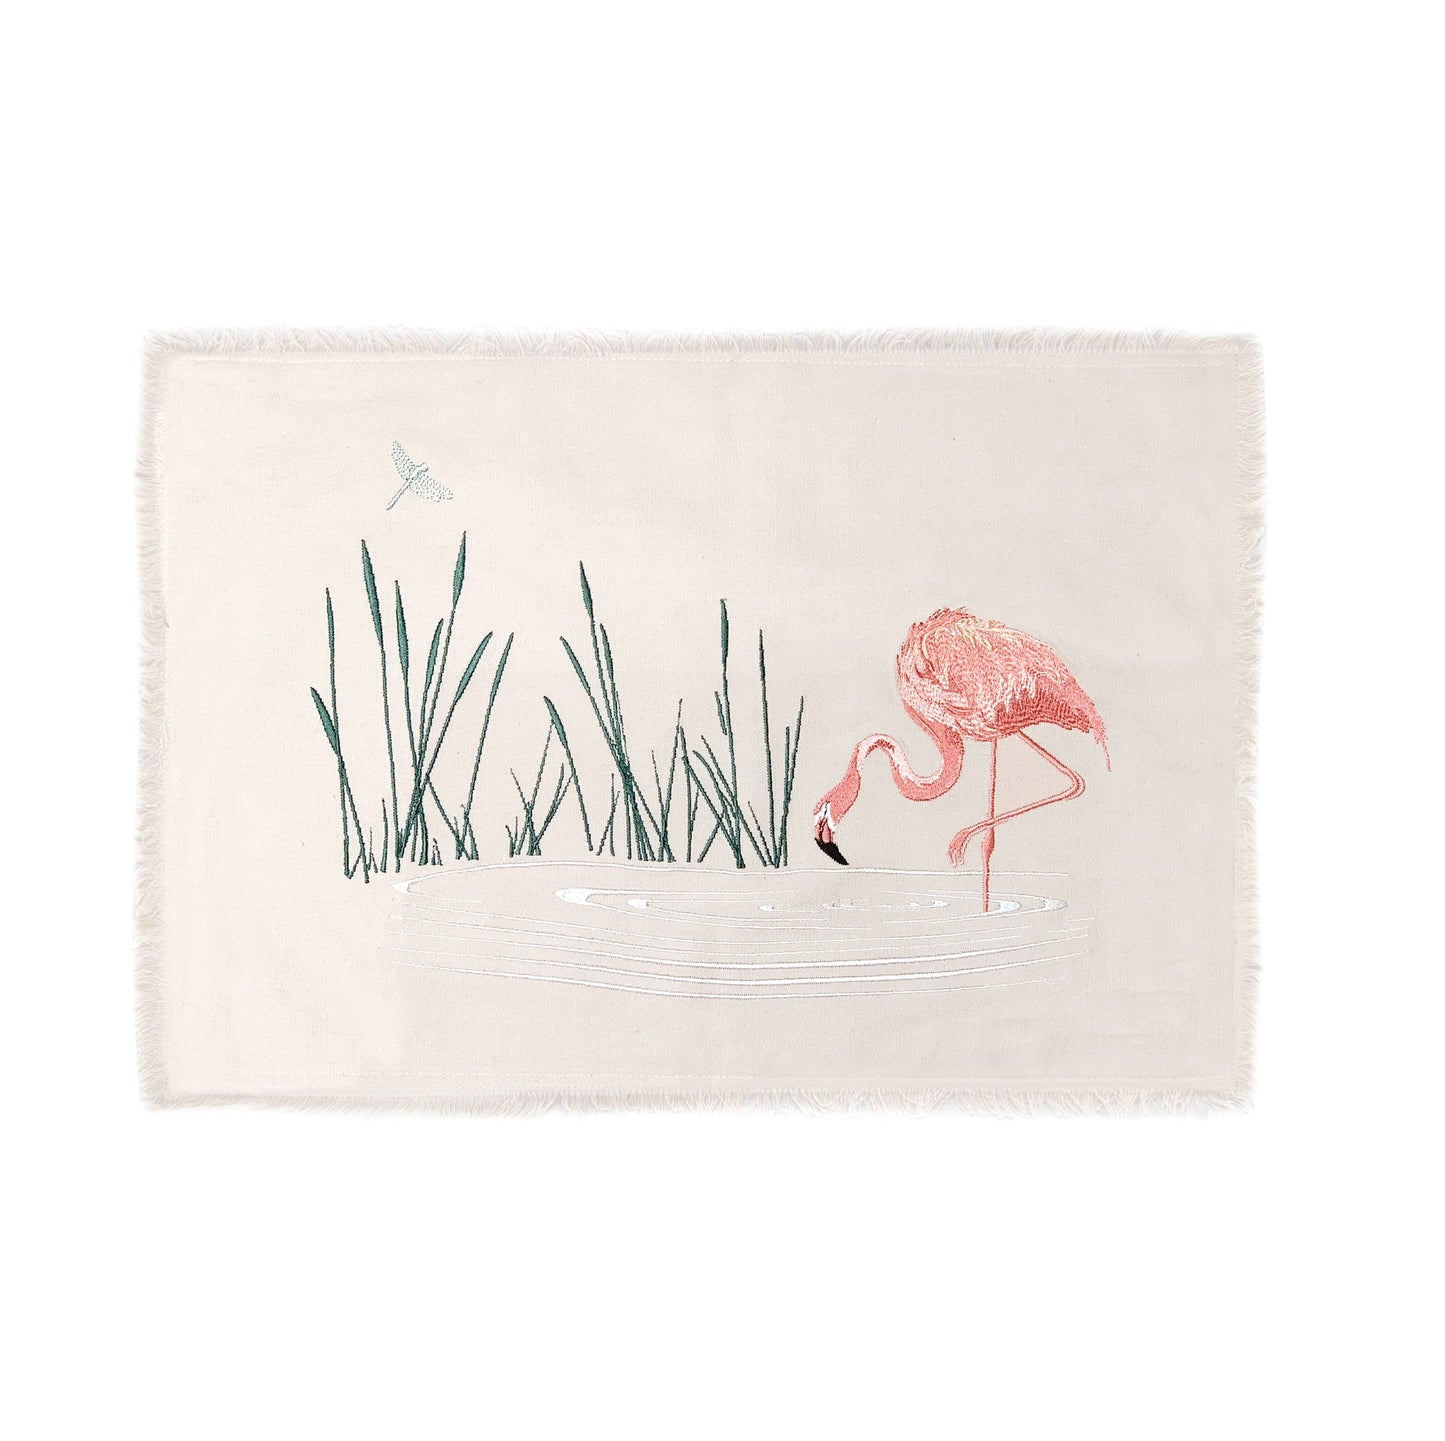 Embroidered Flamingo Placemat